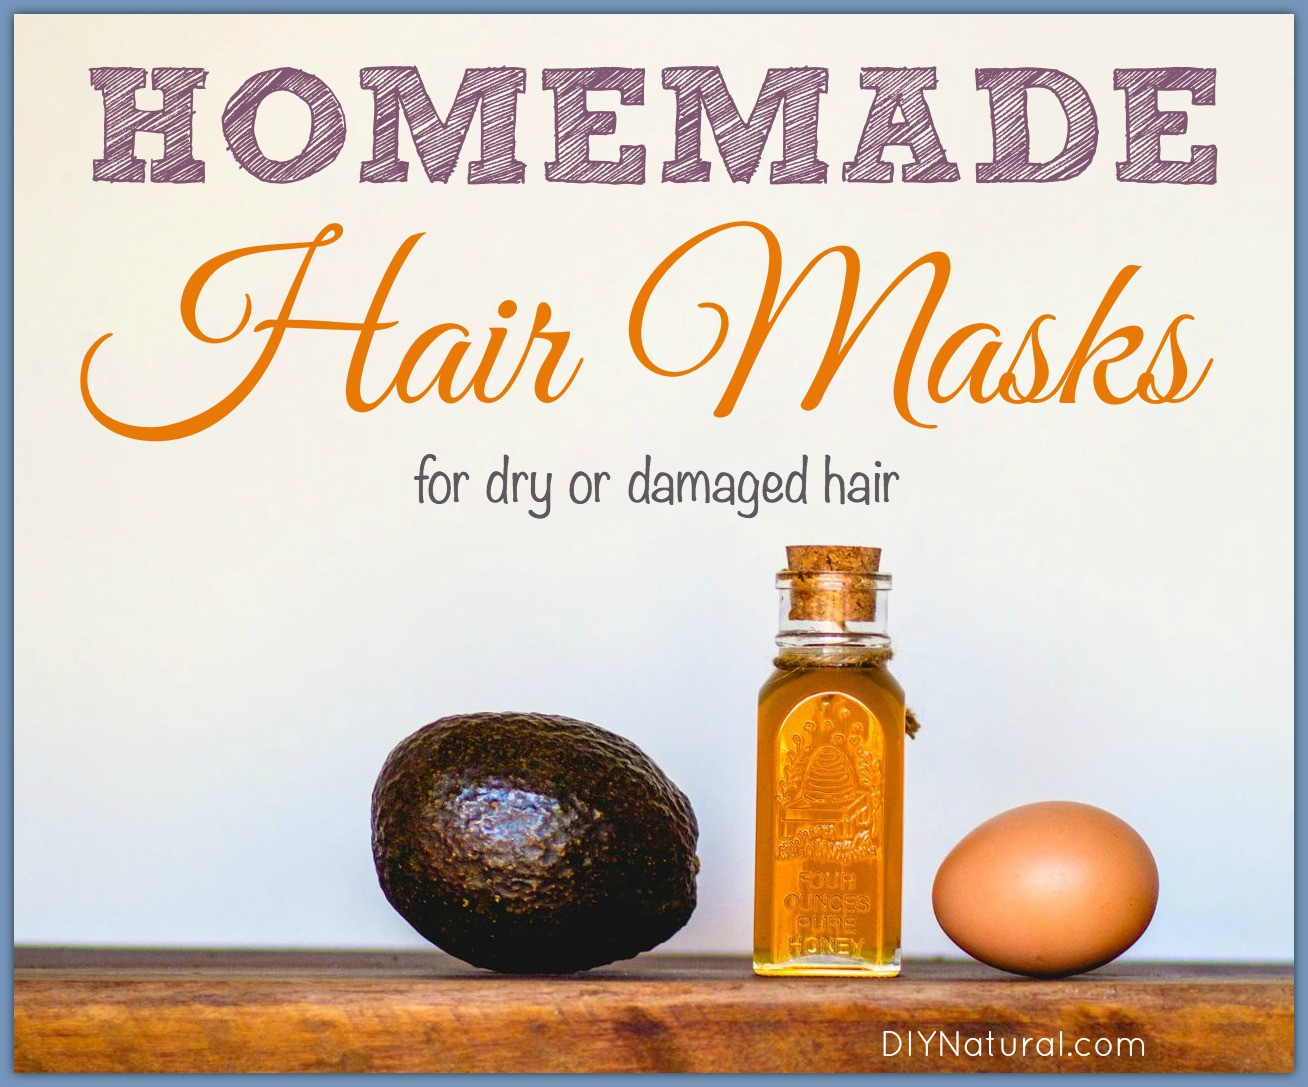 Best ideas about DIY Hair Mask For Natural Hair
. Save or Pin Homemade Hair Mask Several Recipes for Dry or Damaged Hair Now.